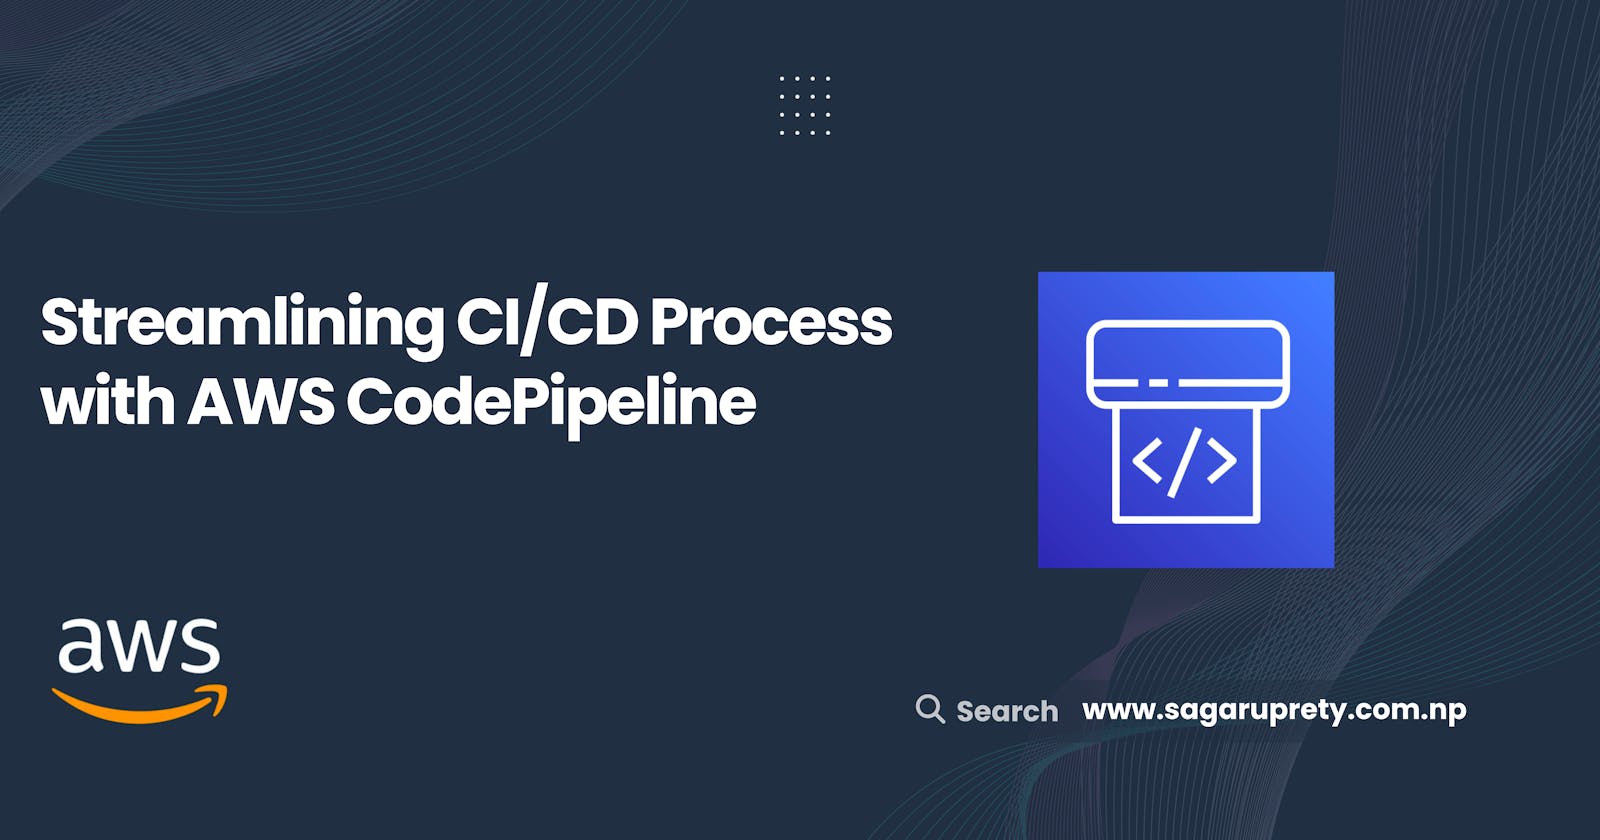 How to implement CI/CD in AWS with AWS CodePipeline?